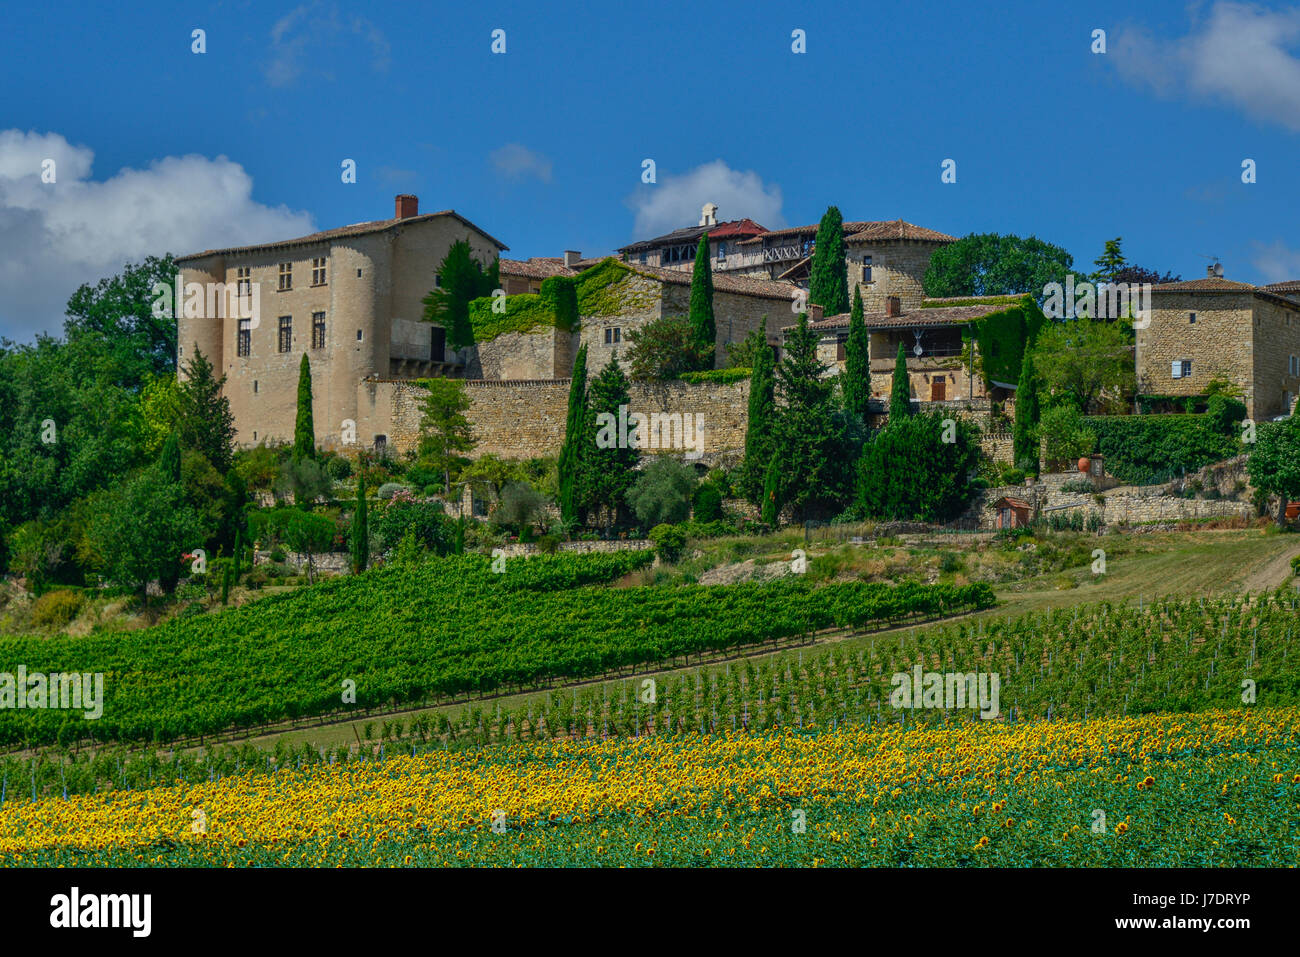 The 13th century Château de Mauriac in the Tarn region of Occitanie in the south of France. The colours of summer dominate the scene. Stock Photo